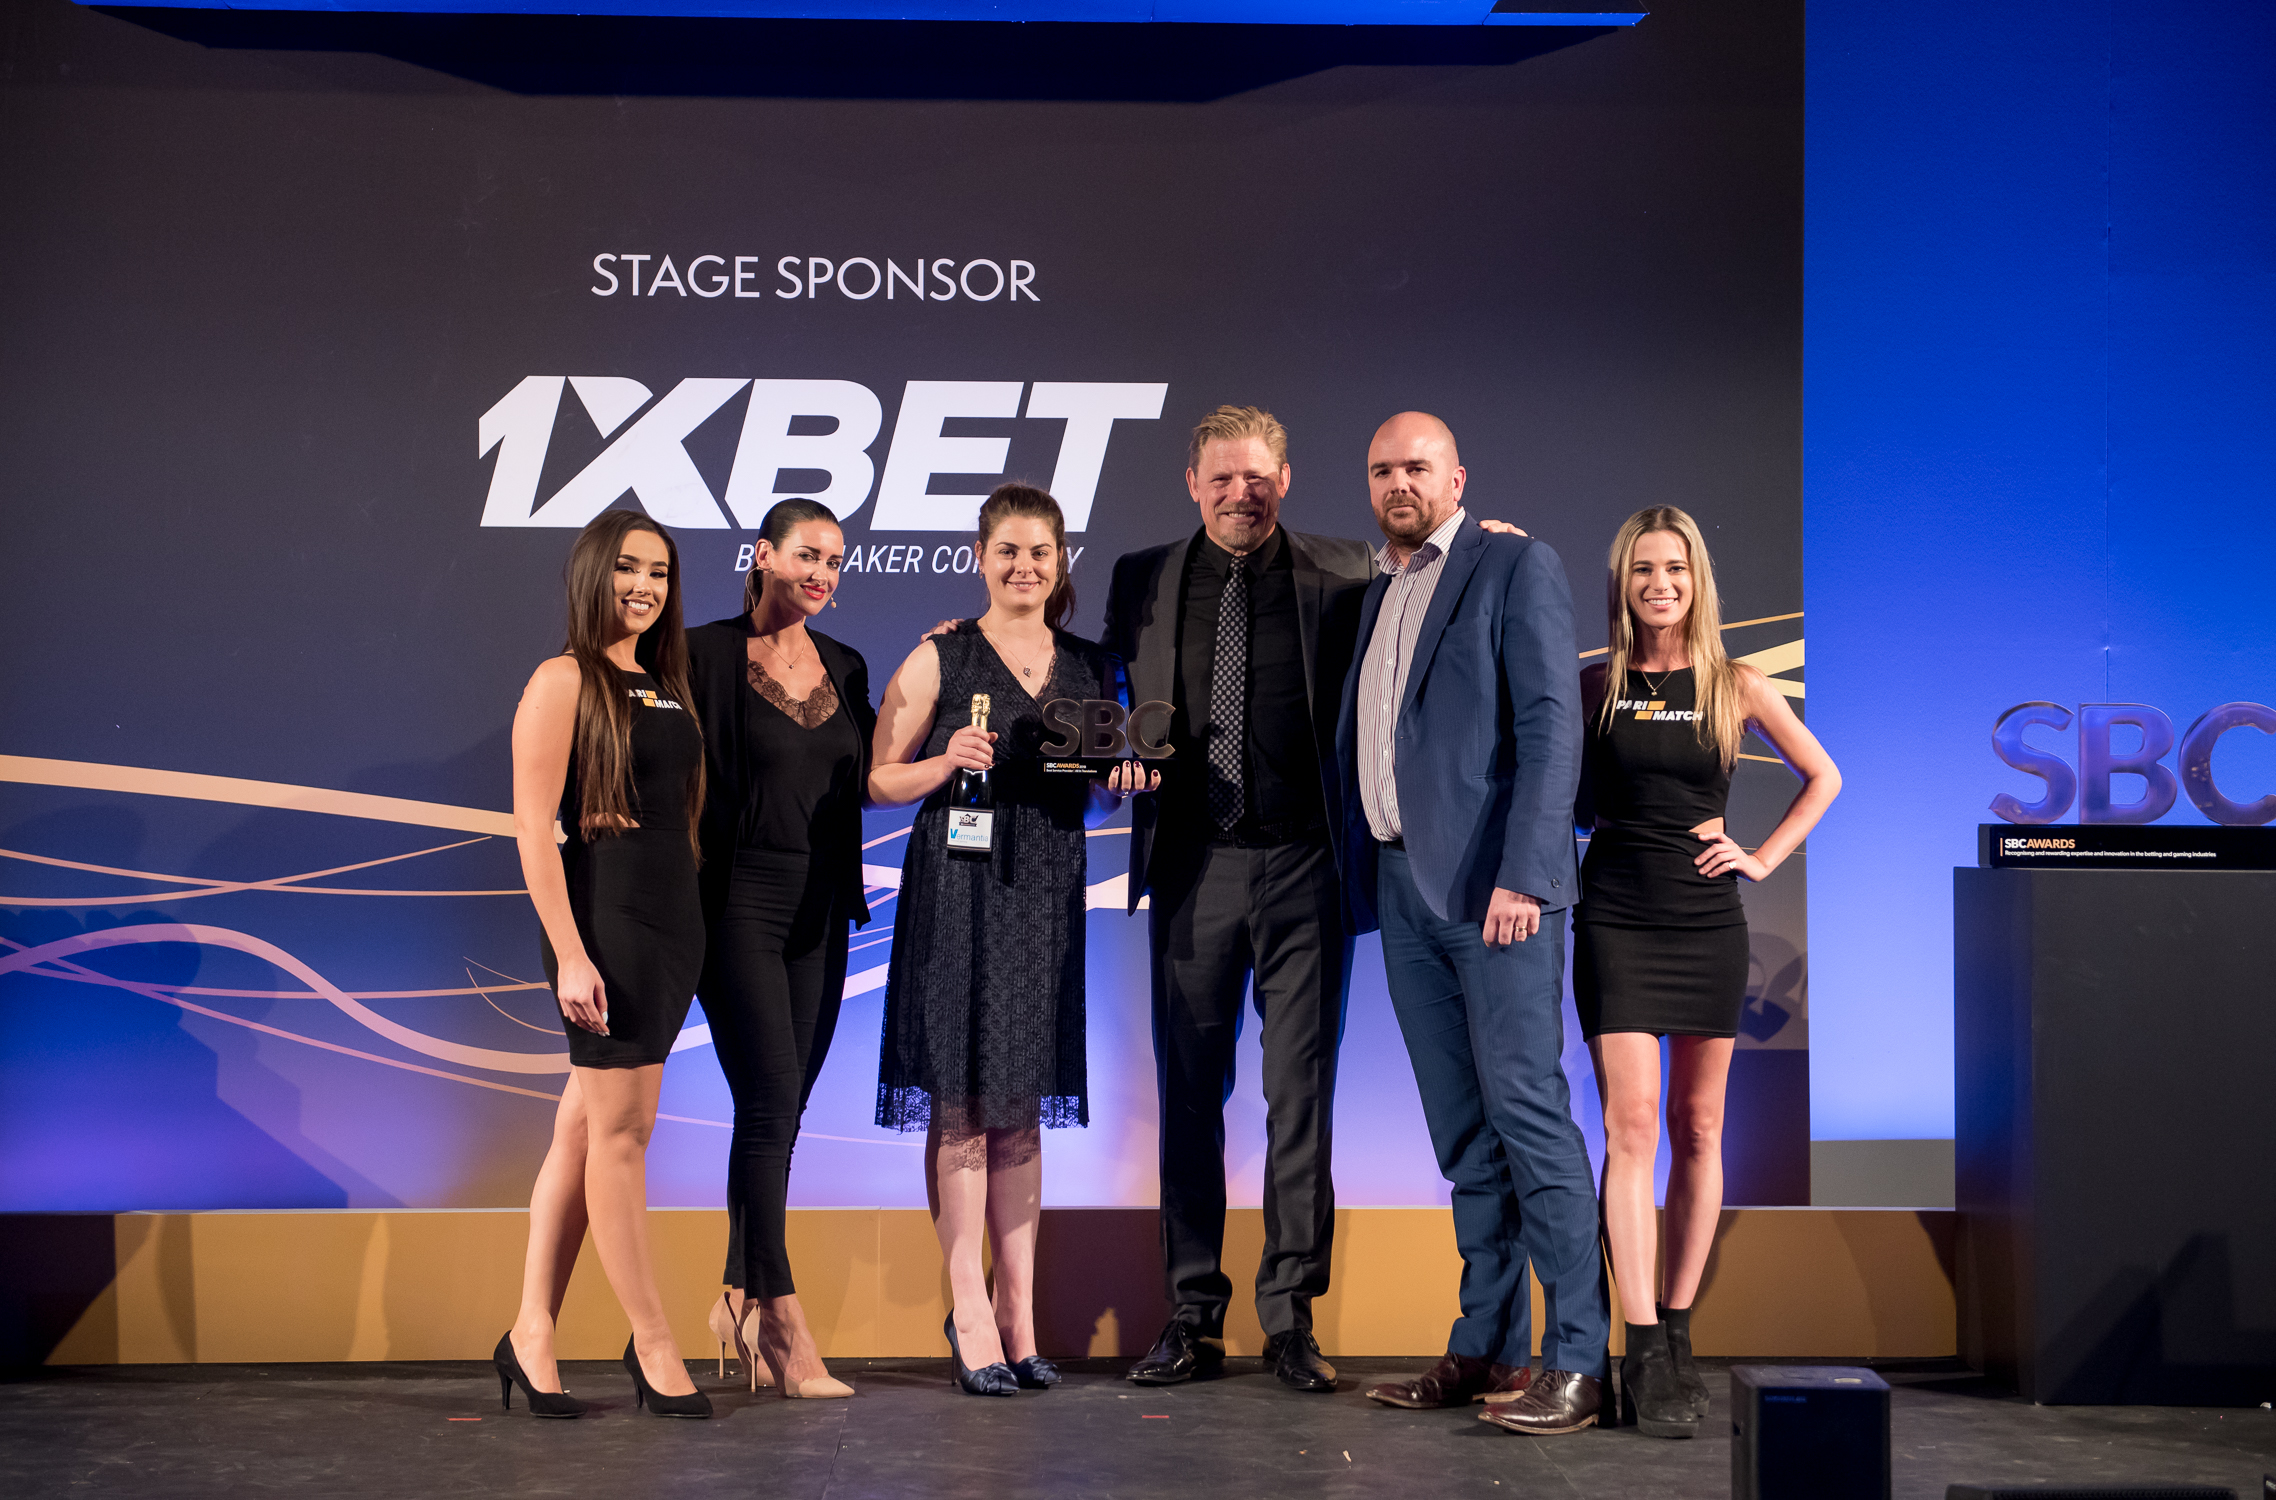 ALL-IN TRANSLATIONS BEST SERVICE PROVIDER AT THE SBC AWARDS 2018 | All-in Global